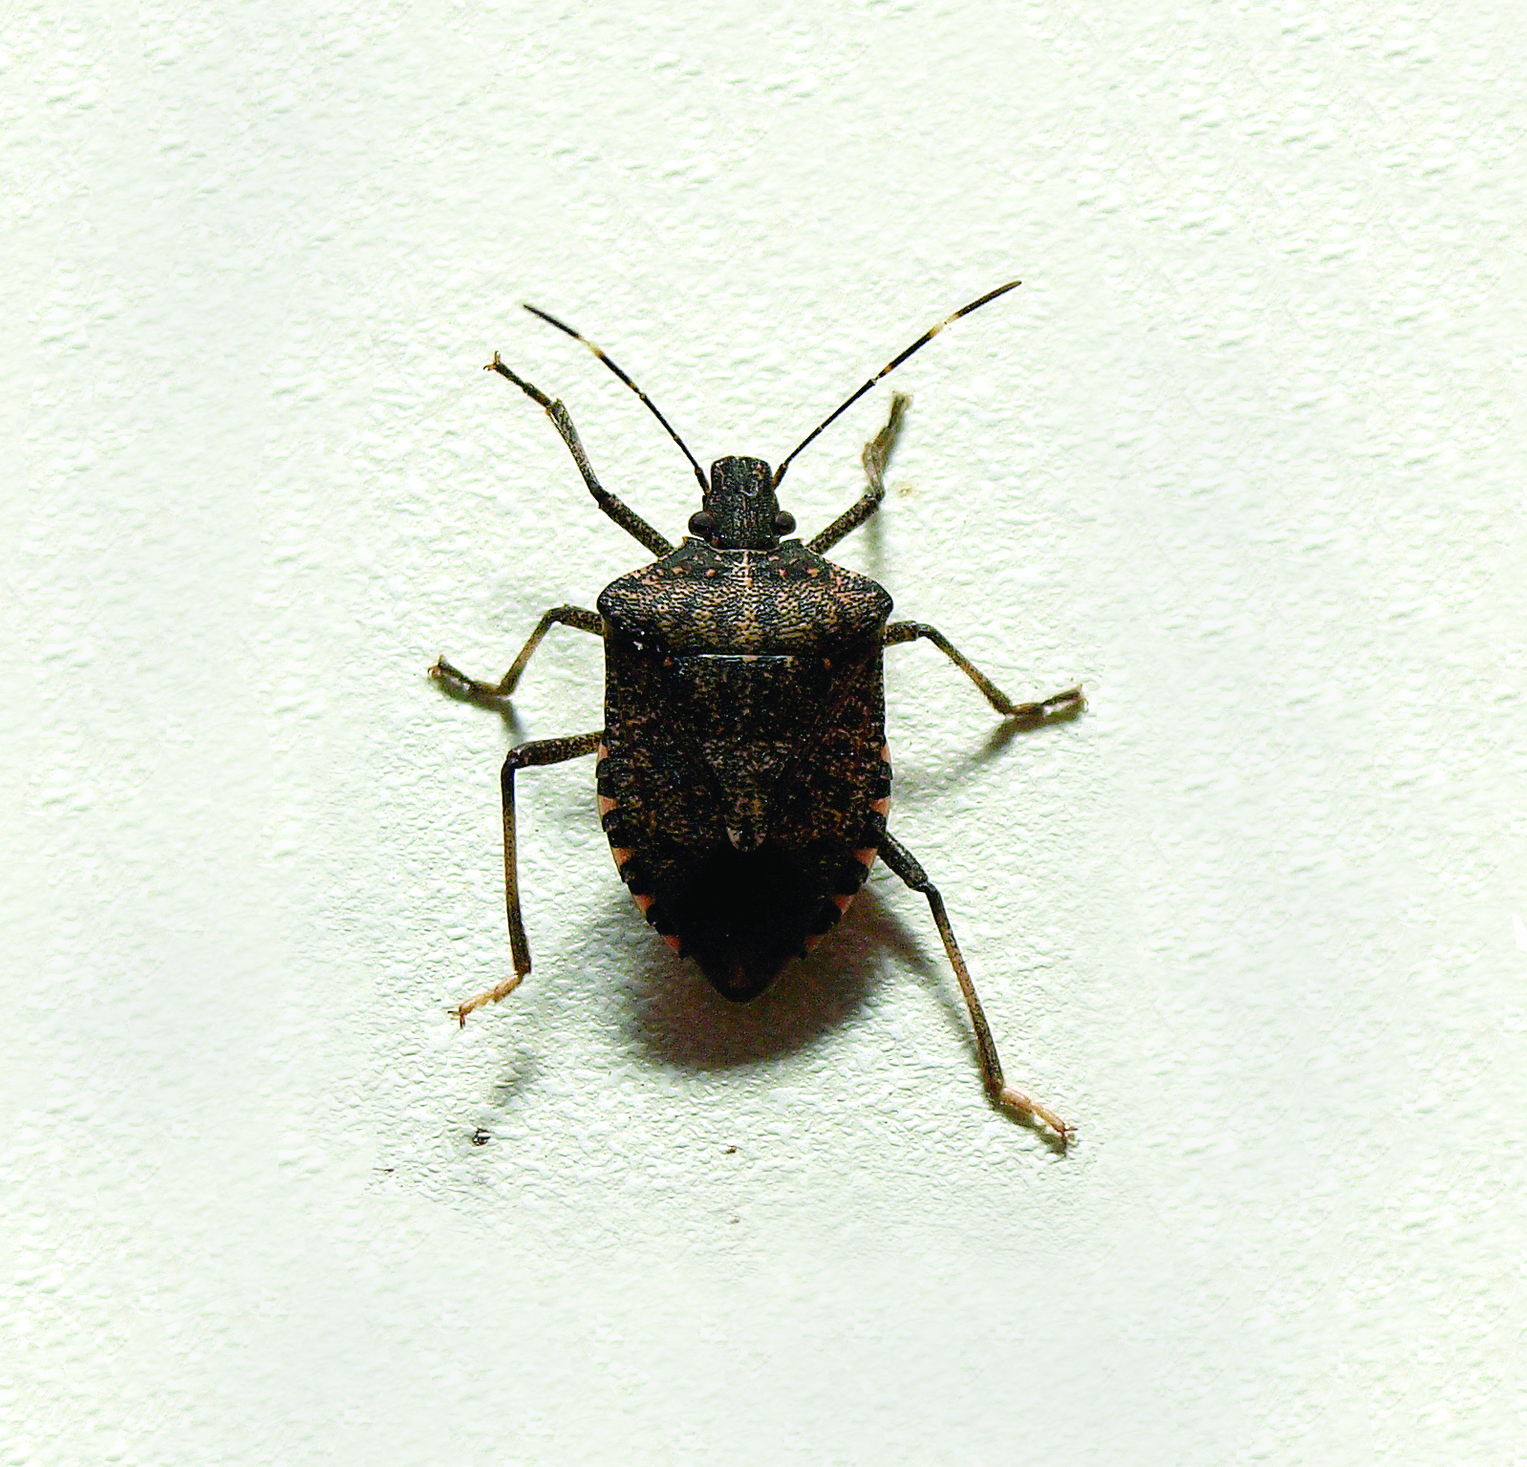 Keep Stink Bugs Out Of Your Home!